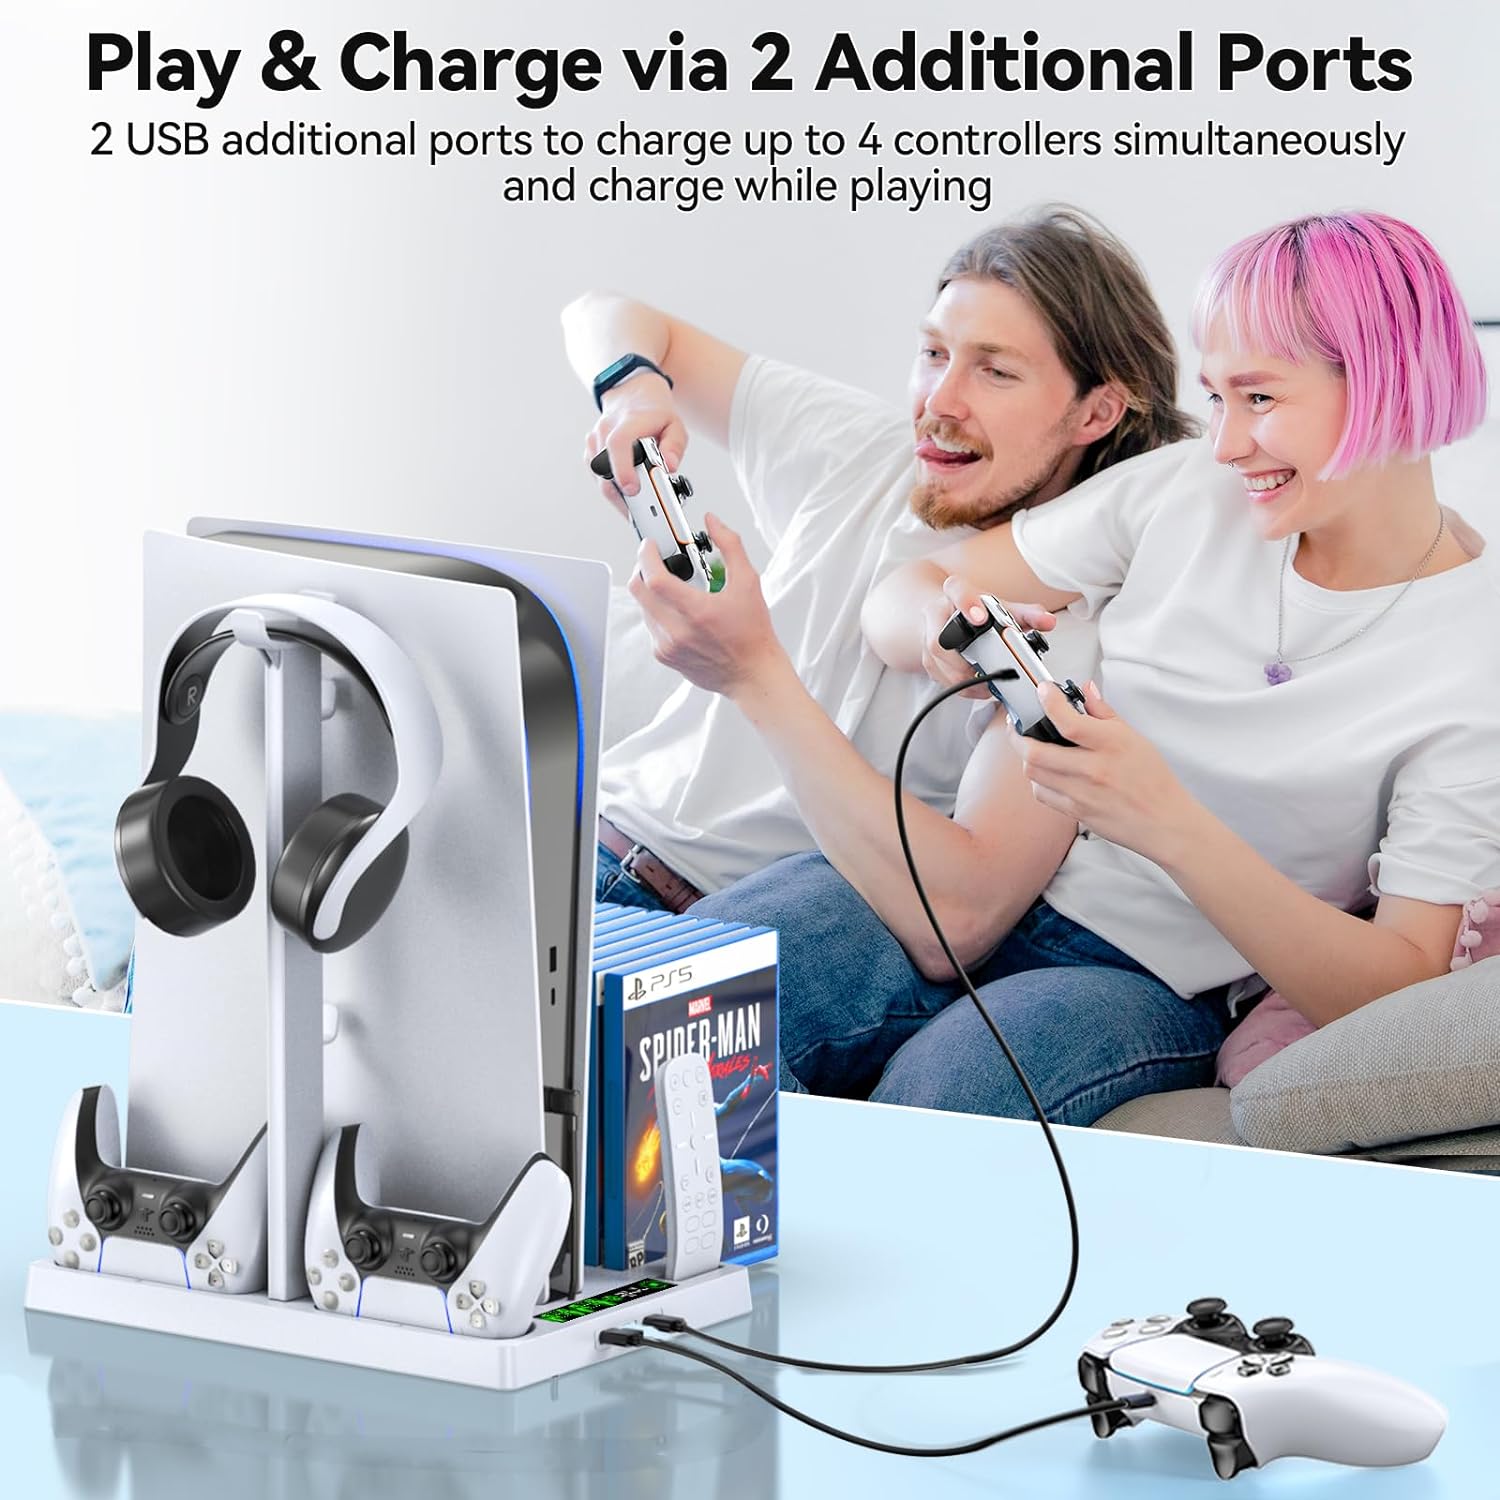 Vertical Stand with Headset Holder and Cooling Fan Base for PS5 Console &  Playstation 5 Accessories, 1 Headphone Stand, 2 Controller Chargers, 15  Game